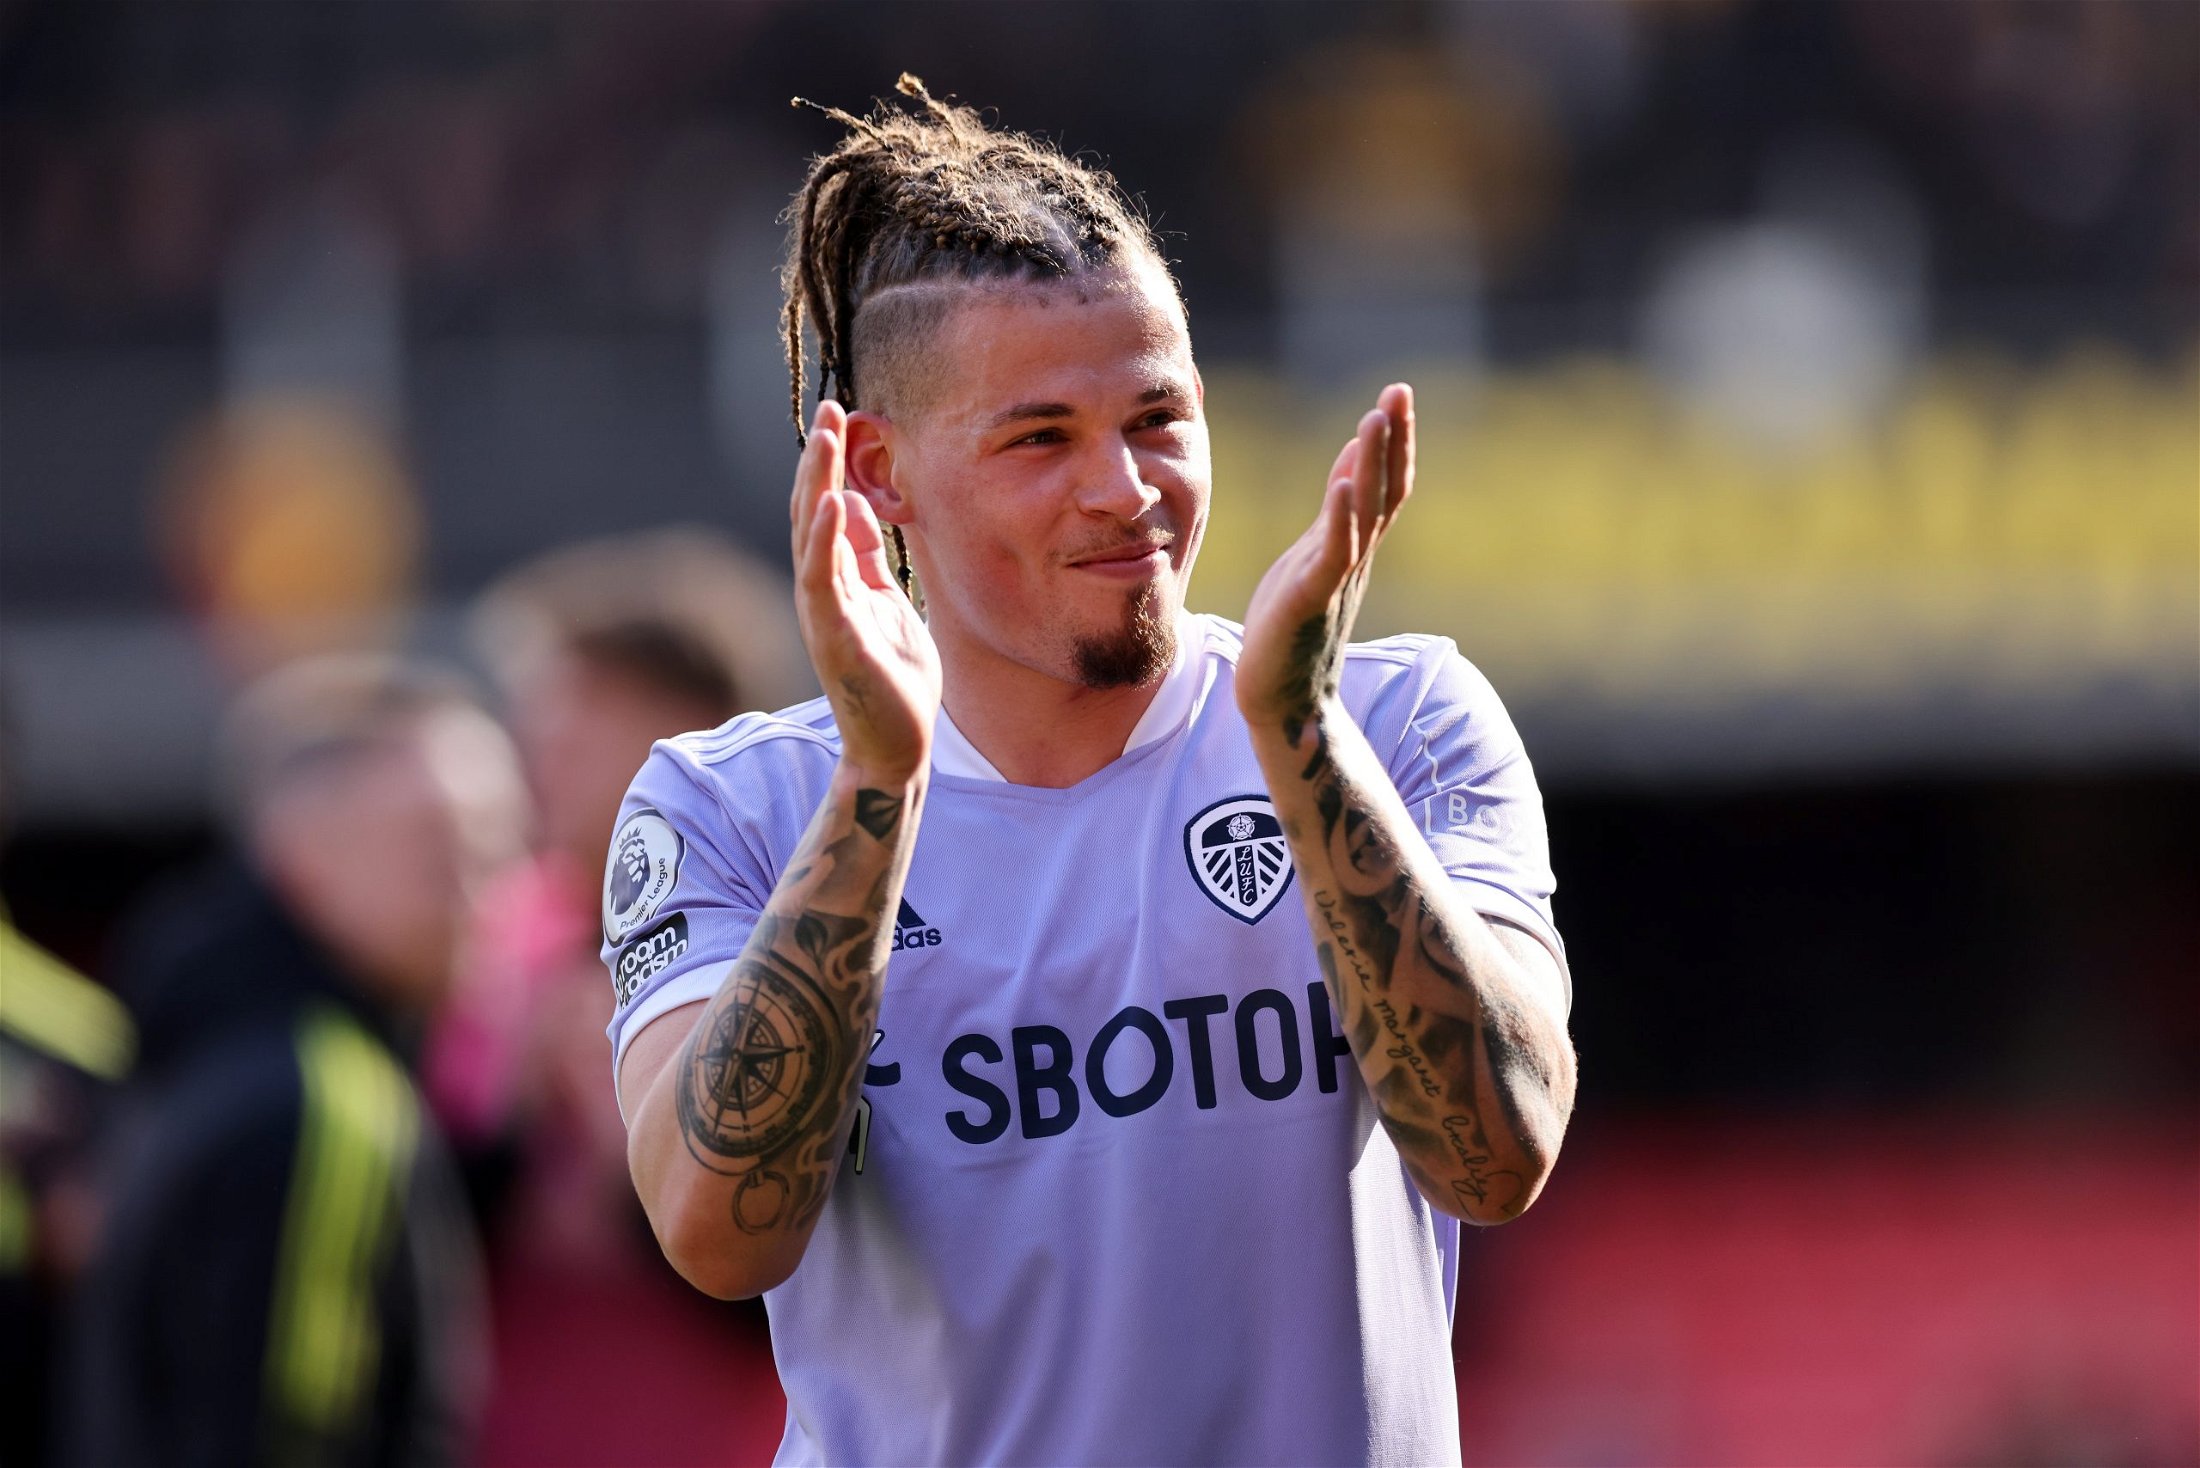  “Can’t wait” – Kalvin Phillips reacts as Leeds United man receives morale boosting news as 